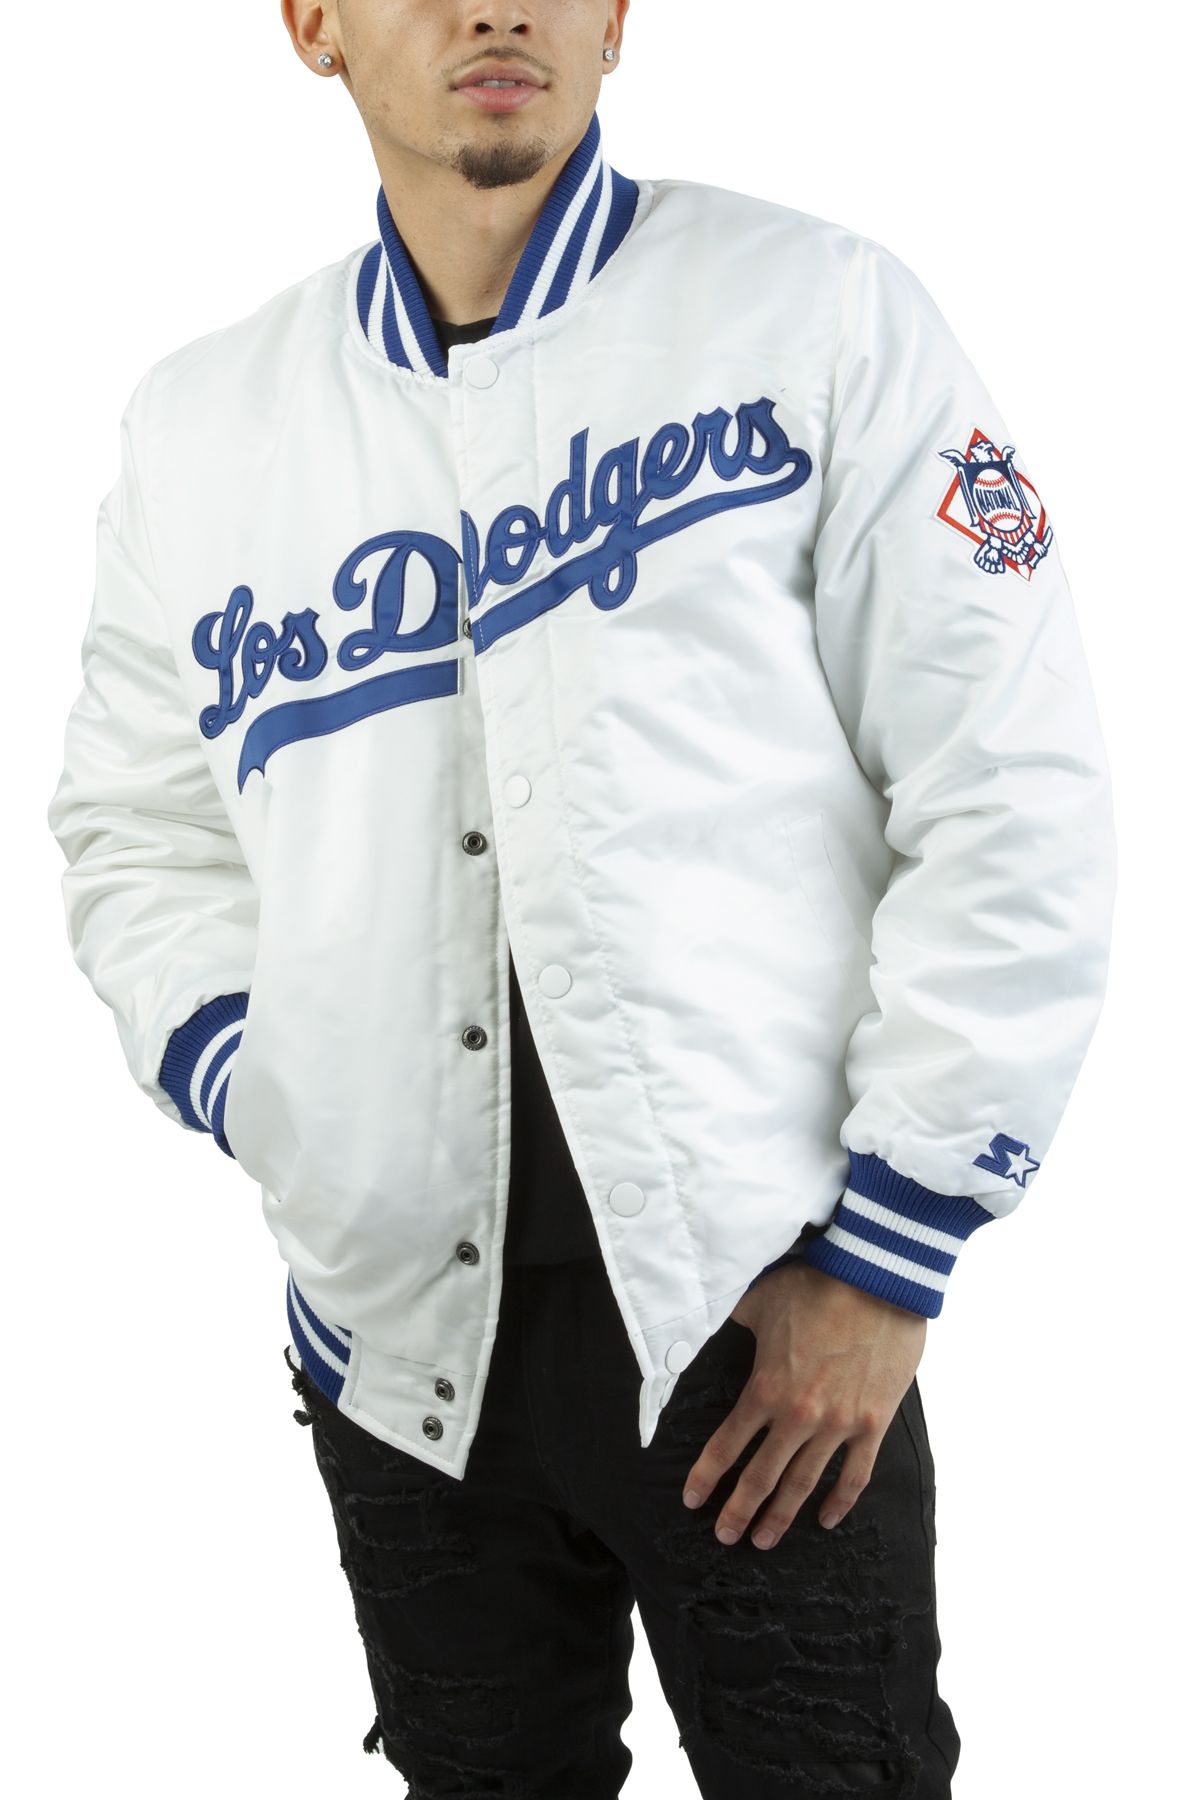 Men's Los Angeles Dodgers Gifts & Gear, Mens Dodgers Apparel, Guys Clothes